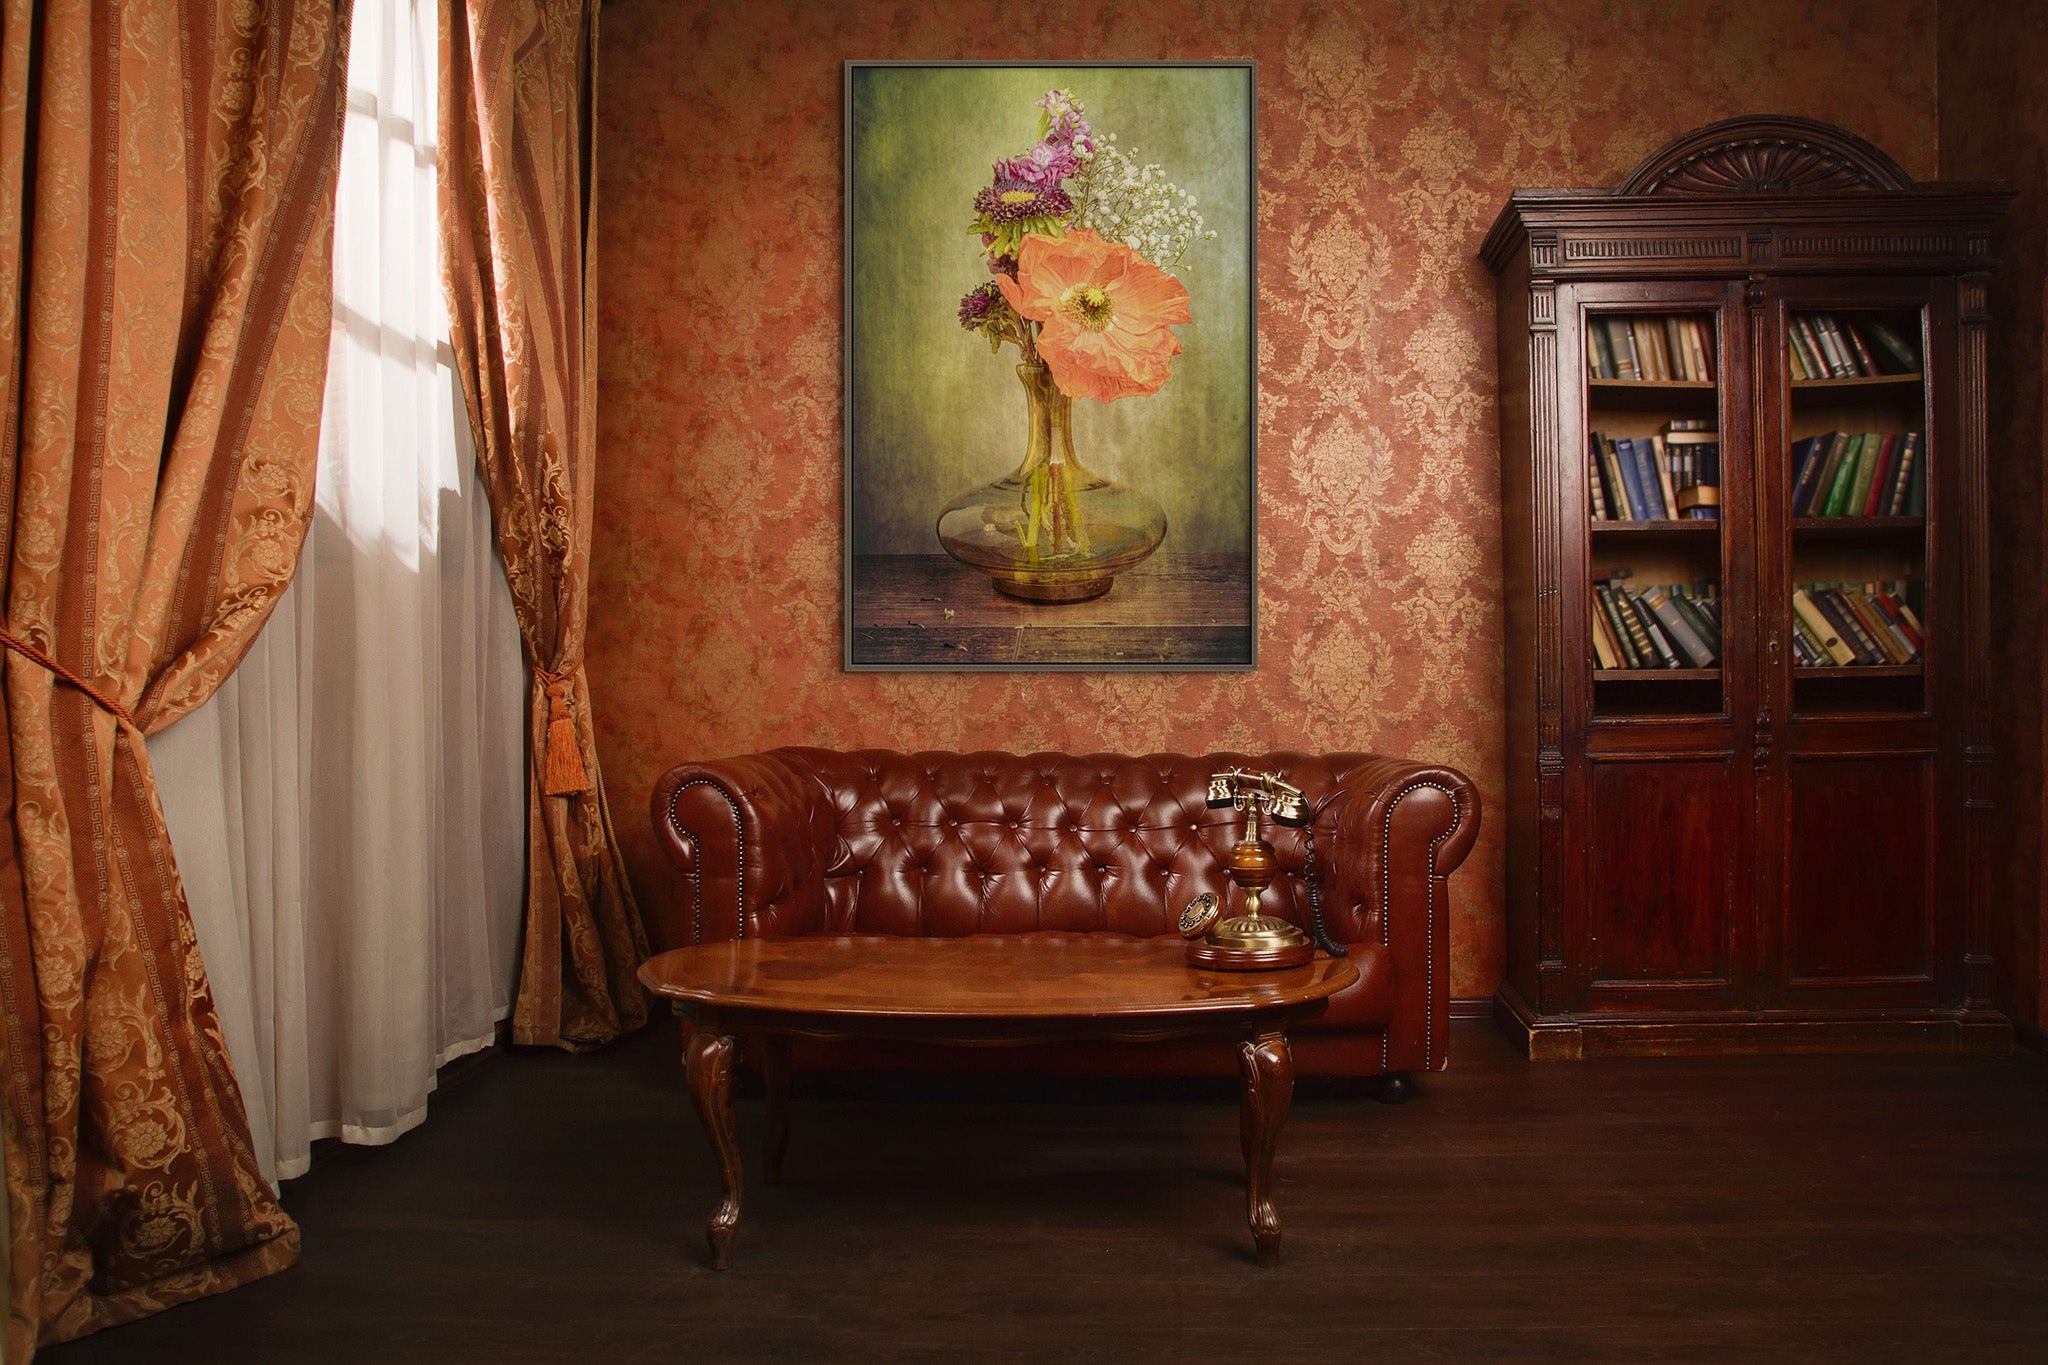 Picture hanging on the wall of a sitting area in a speakeasy. The picture is a fine art flower photograph of a bouquet with an orange Icelandic poppy titled "Speakeasy" by Cameron Dreaux of Dreaux Fine Art.